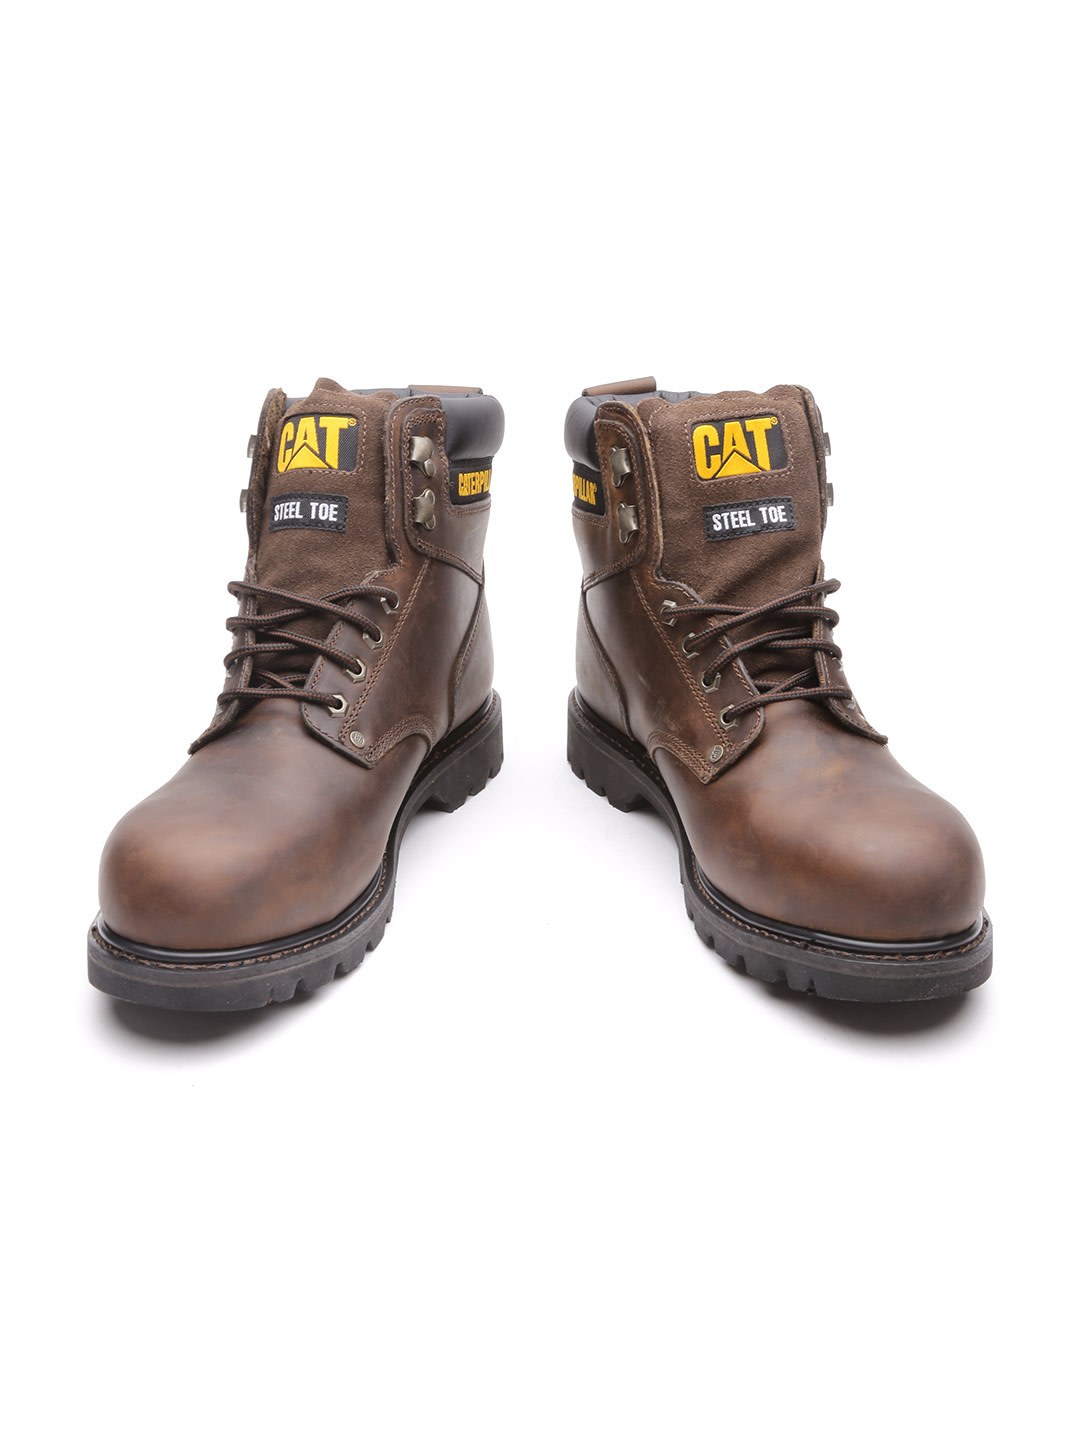 CAT Men's Second Shift Steel Toe Work Boot - Armstrong Products